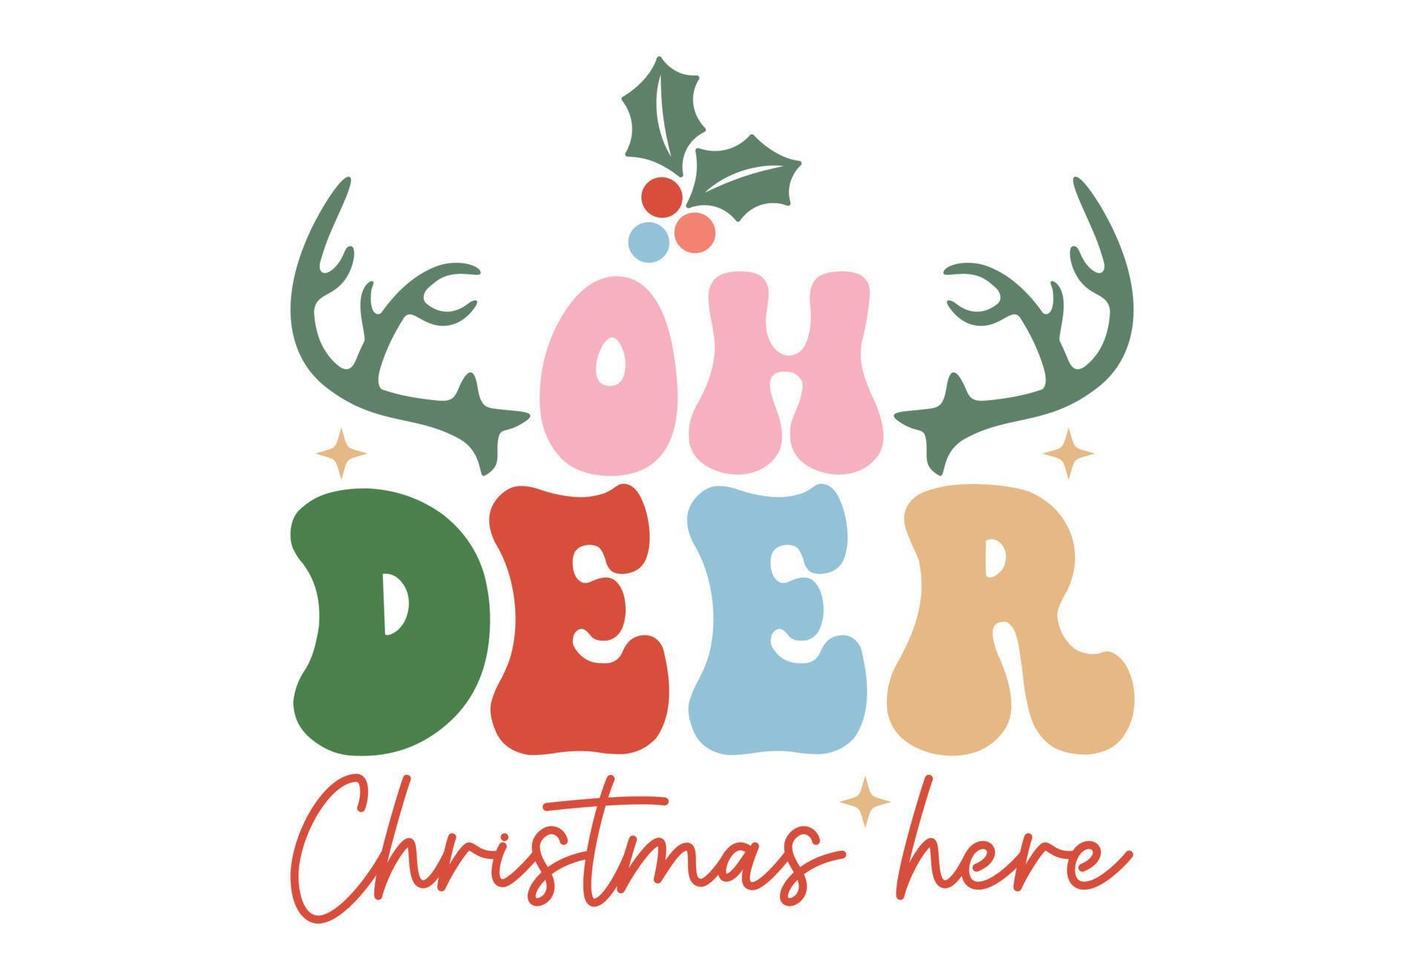 Oh Deer Christmas Here, Christmas Quote vector